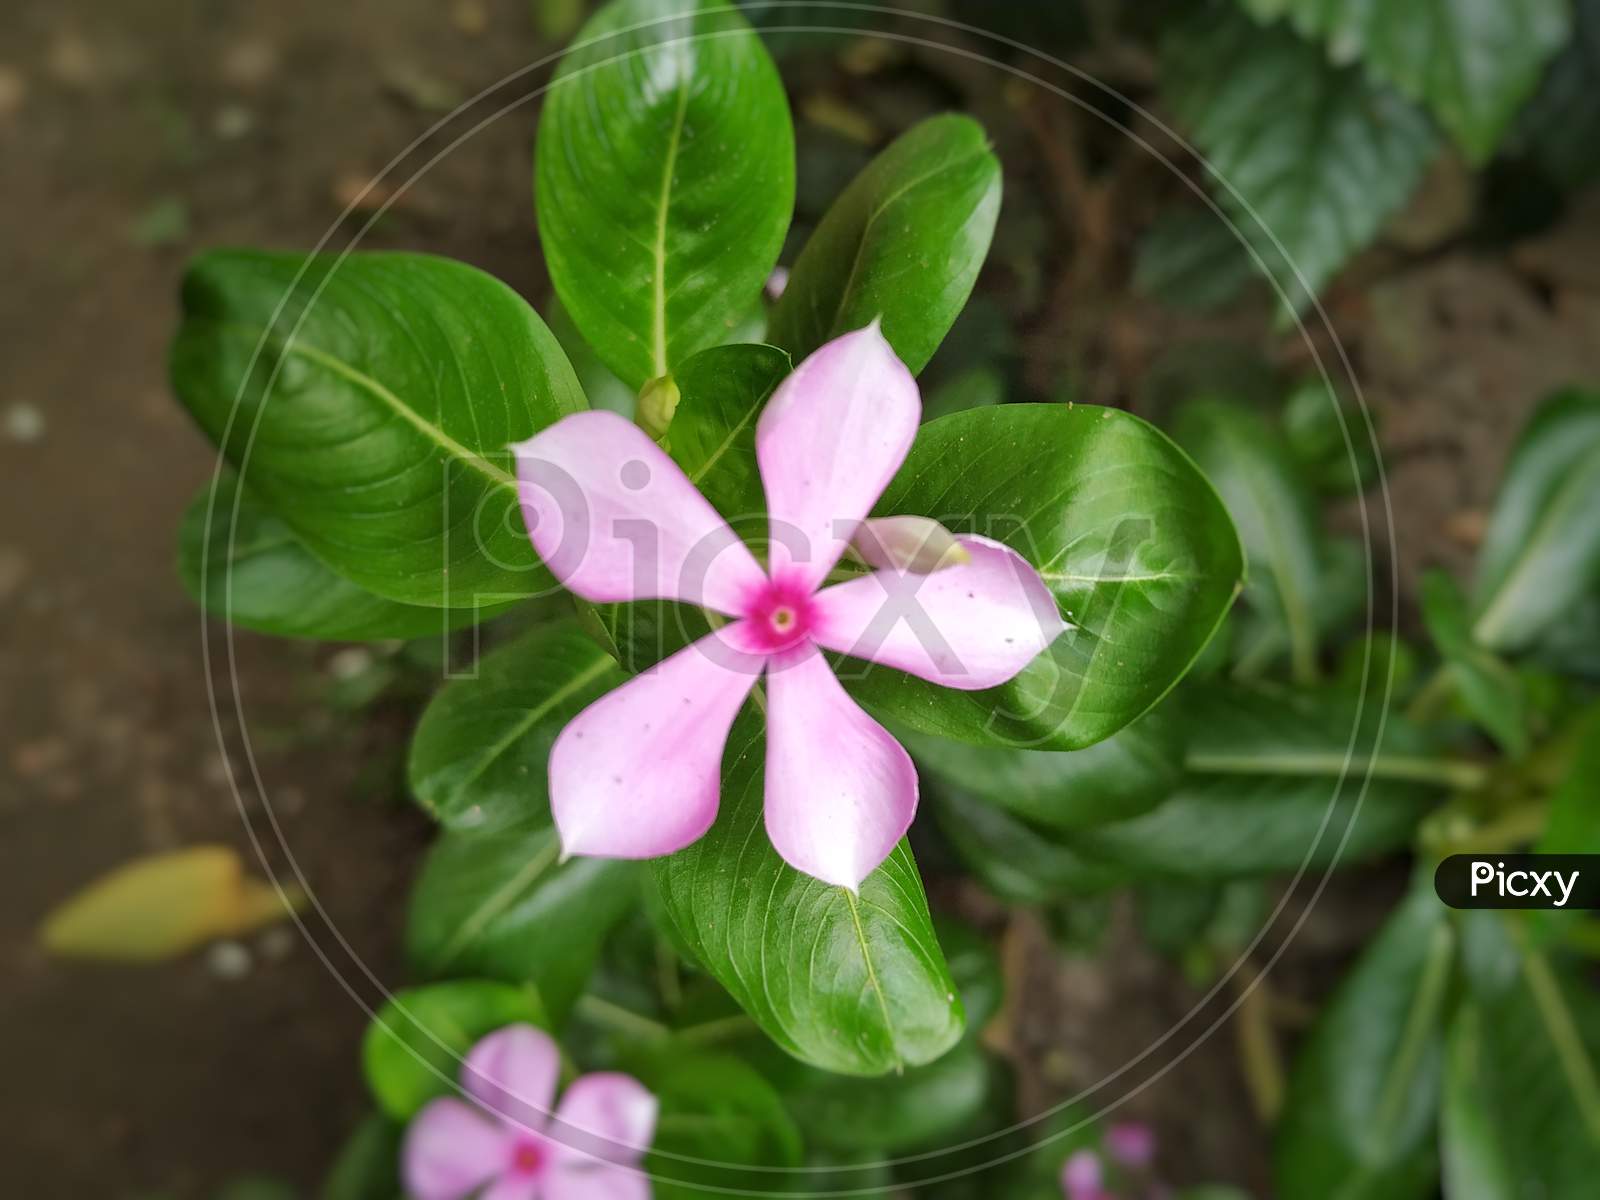 Periwinkle Flower Stock Photos- Growing Colorful Periwinkle Flowers And Plants. This Photo Is Taken In India.